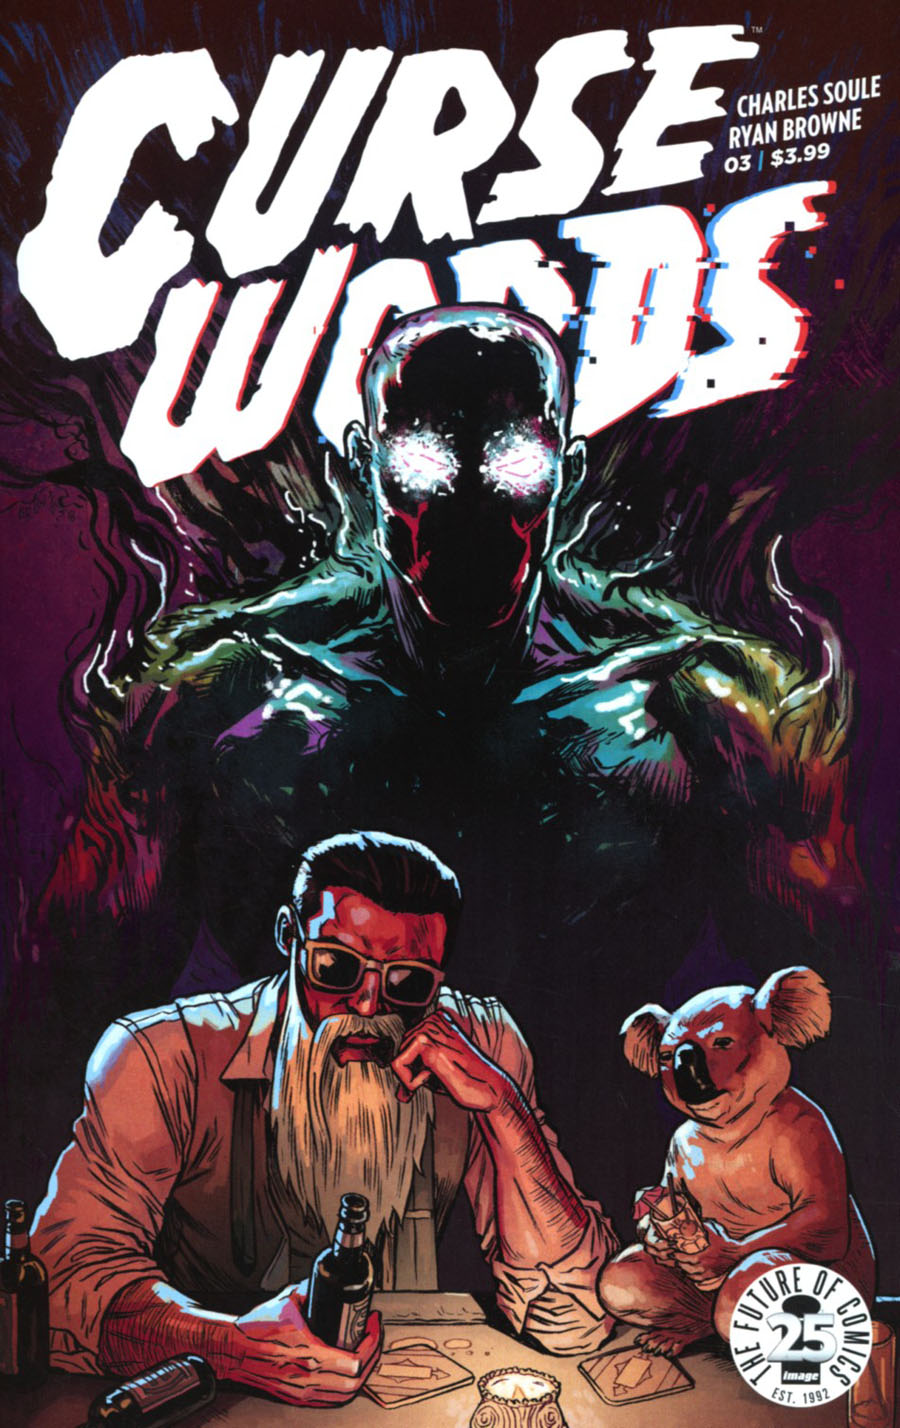 Curse Words #3 Cover A Ryan Browne